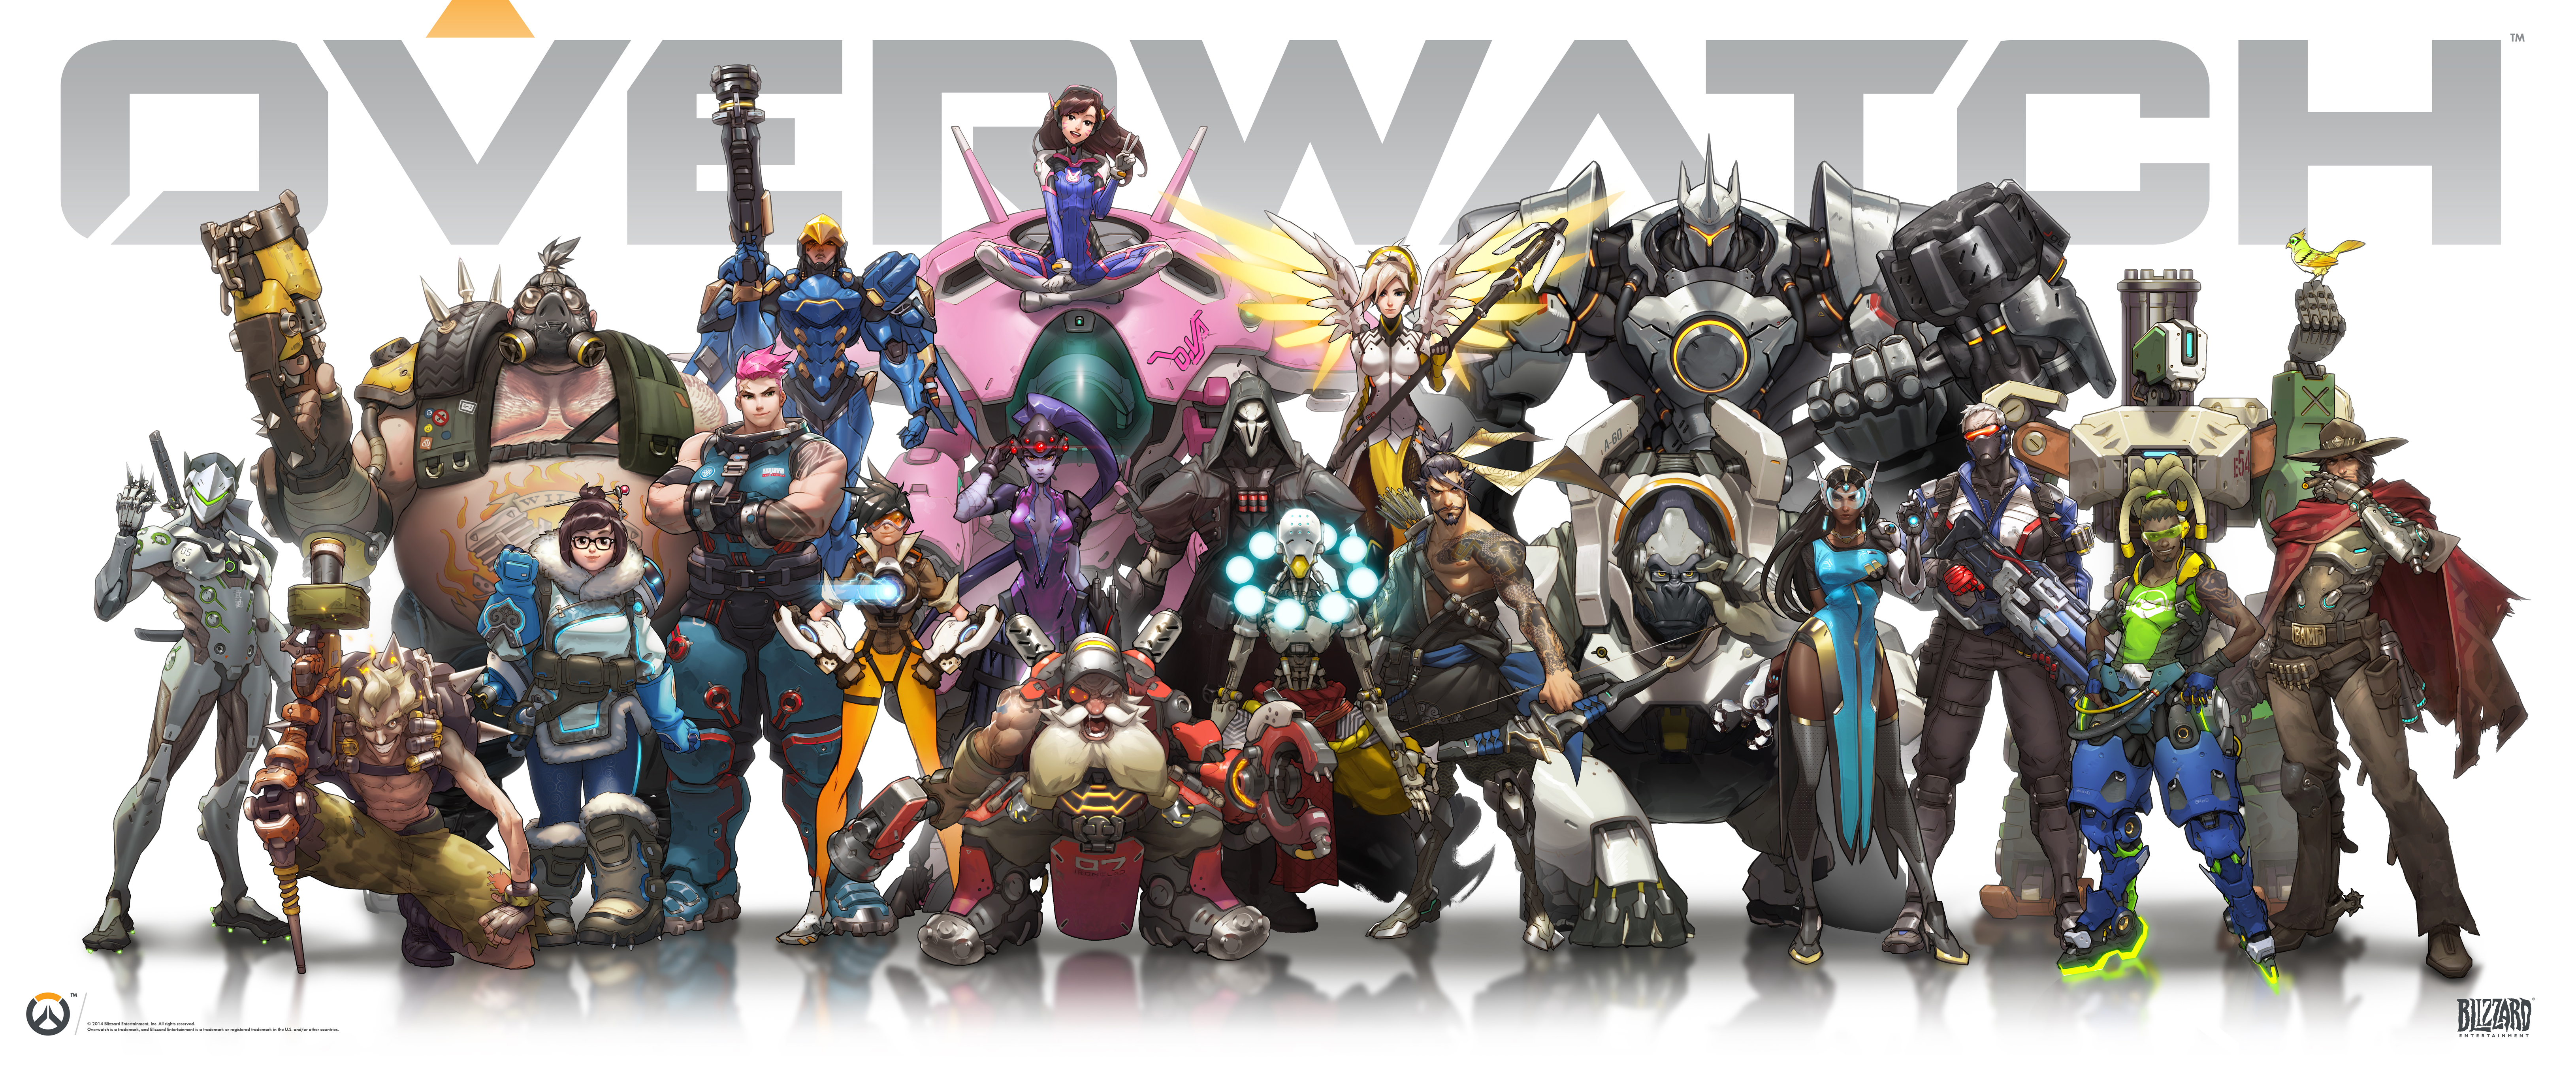 Overwatch players type: Are they familiar?